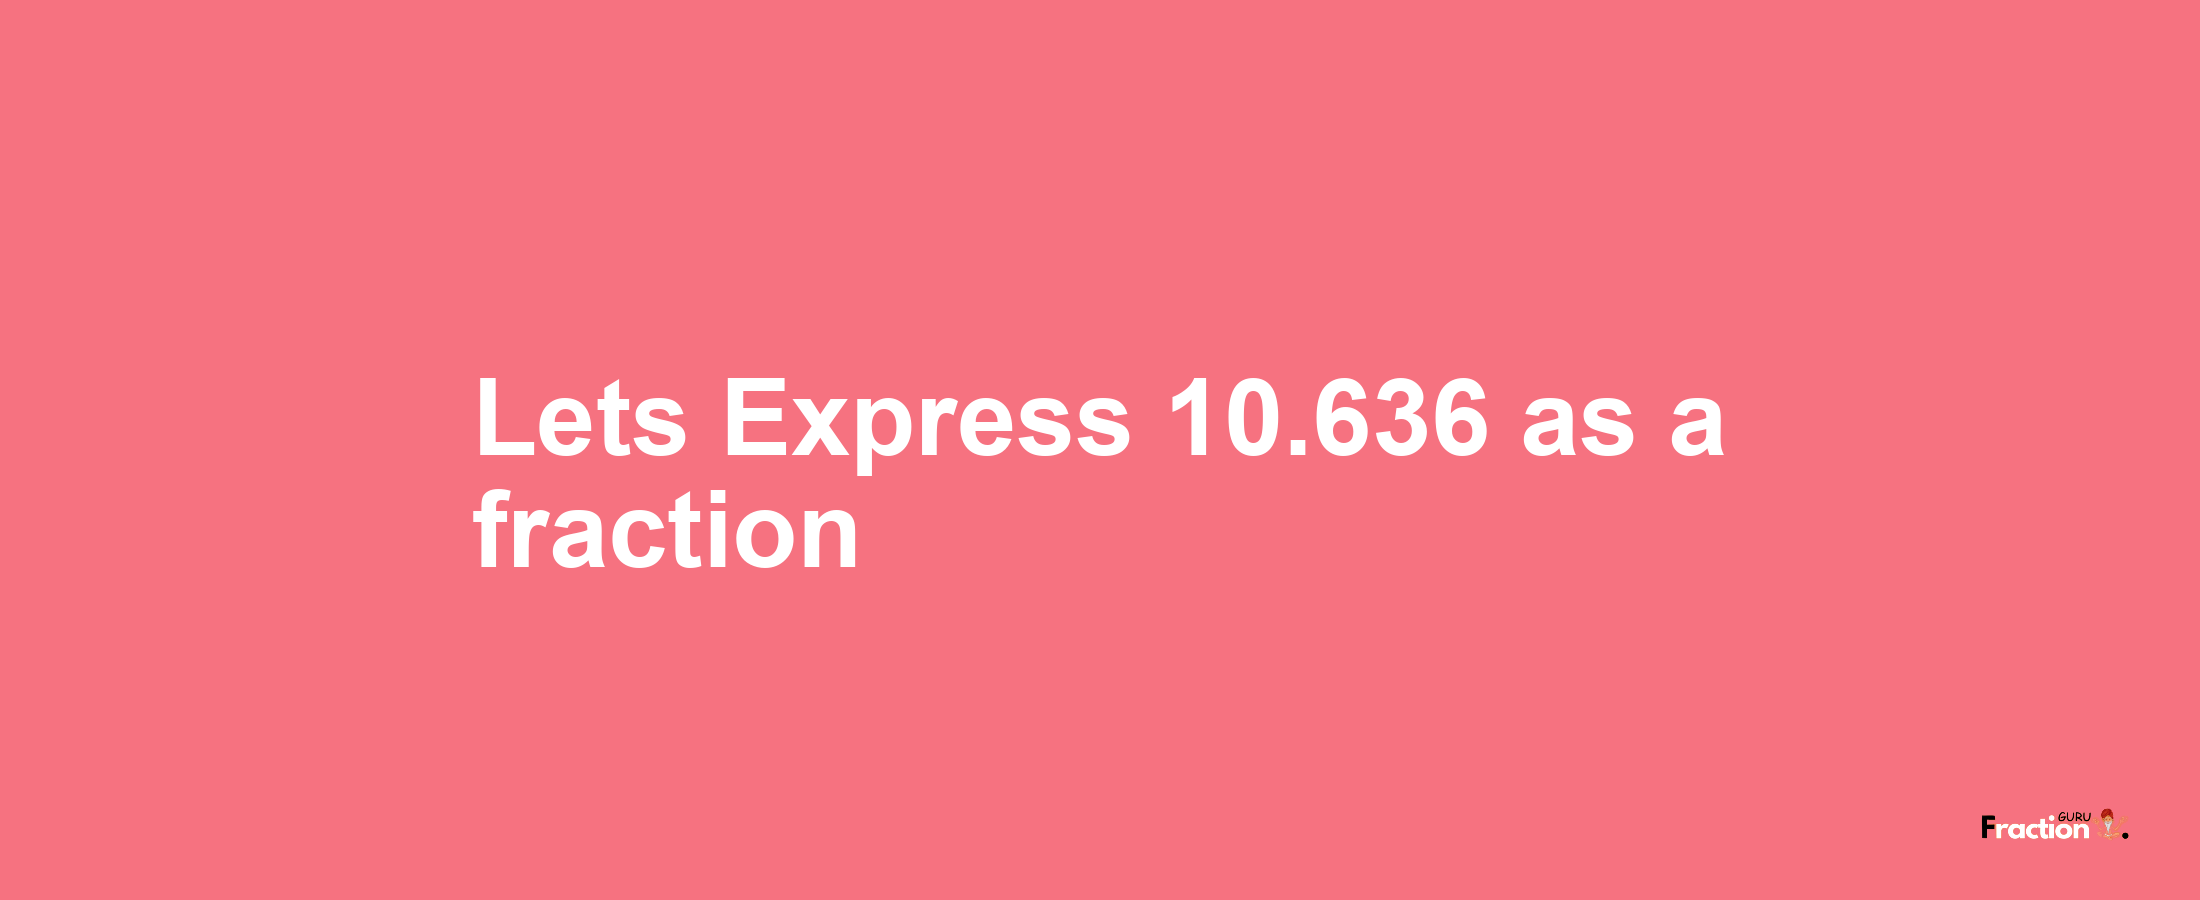 Lets Express 10.636 as afraction